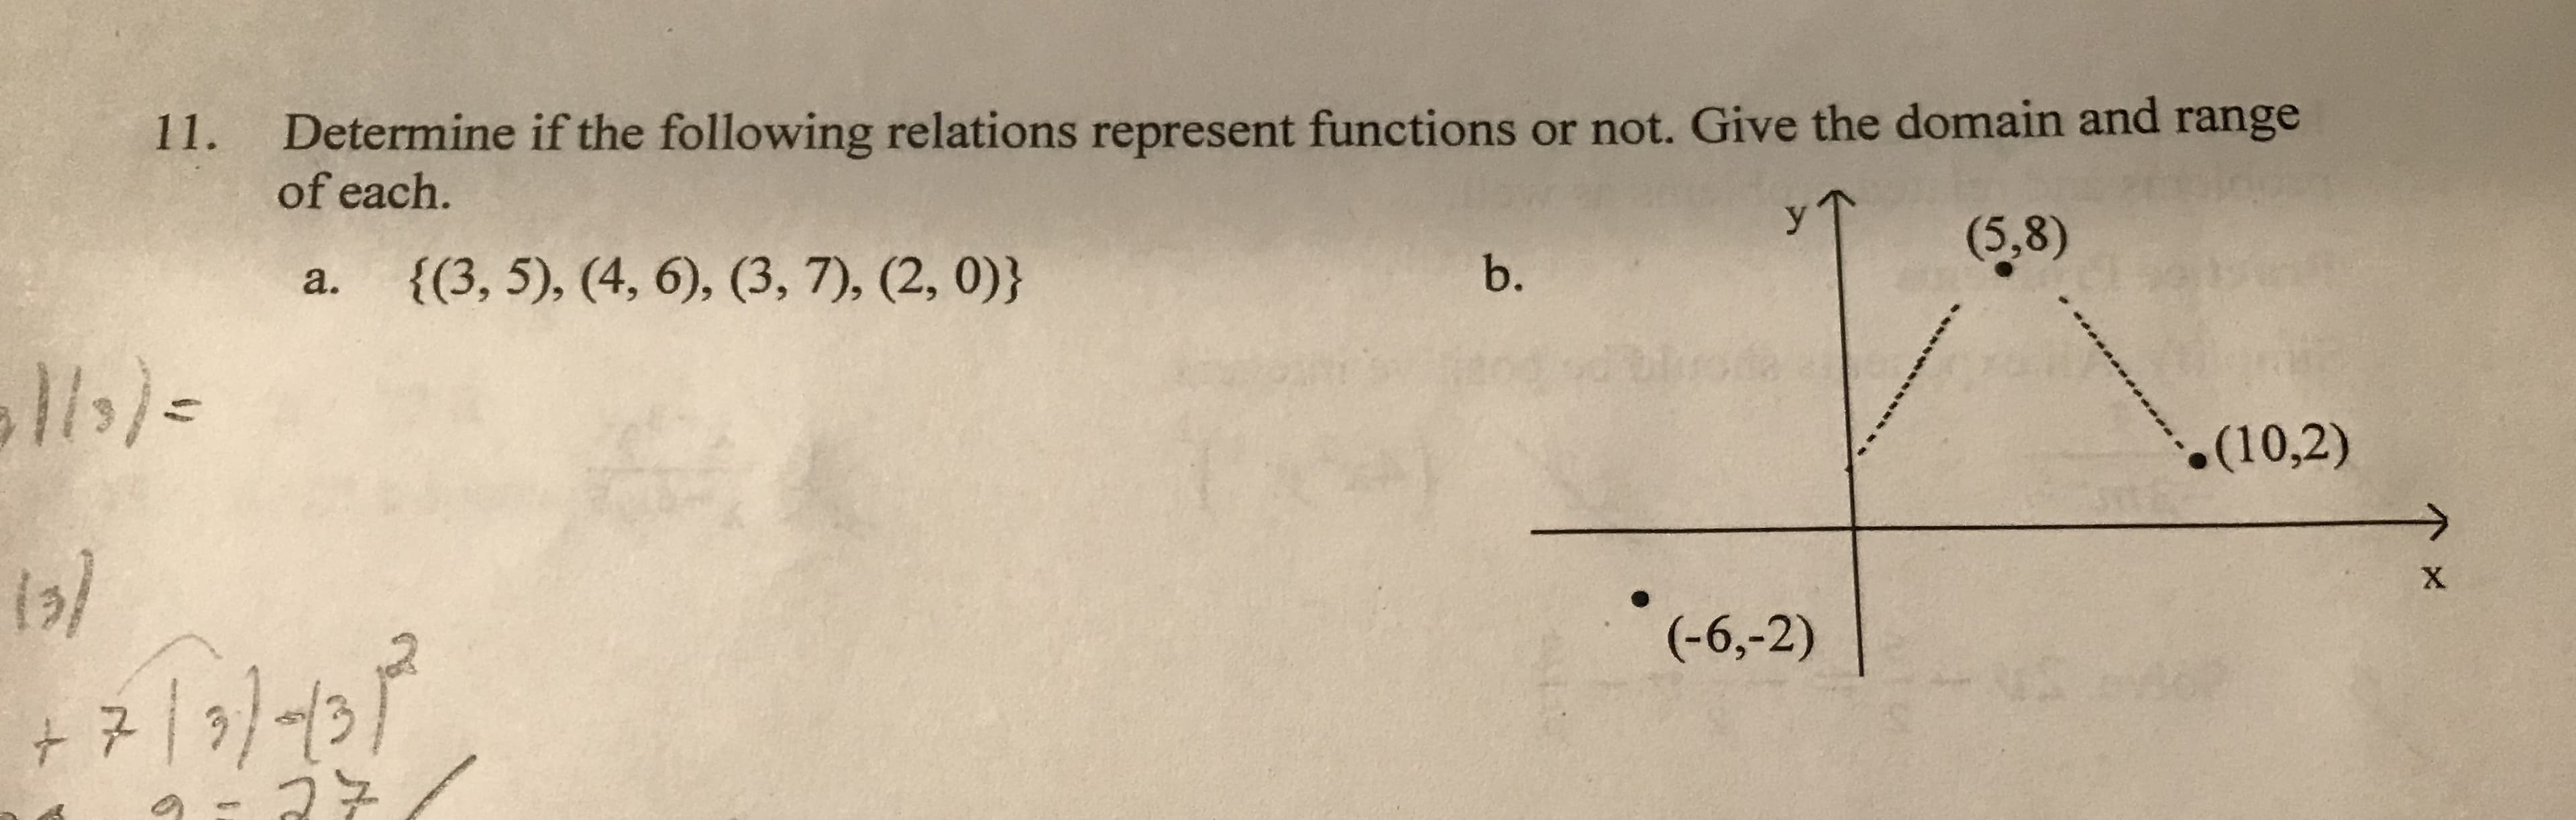 11. Determine if the following relations represent functions or not. Give the domain and range
of each.
(5,8)
b.
{(3, 5), (4, 6), (3, 7), (2, 0)}
a.
(10,2)
* (-6,-2)
+7/9/-13
27
